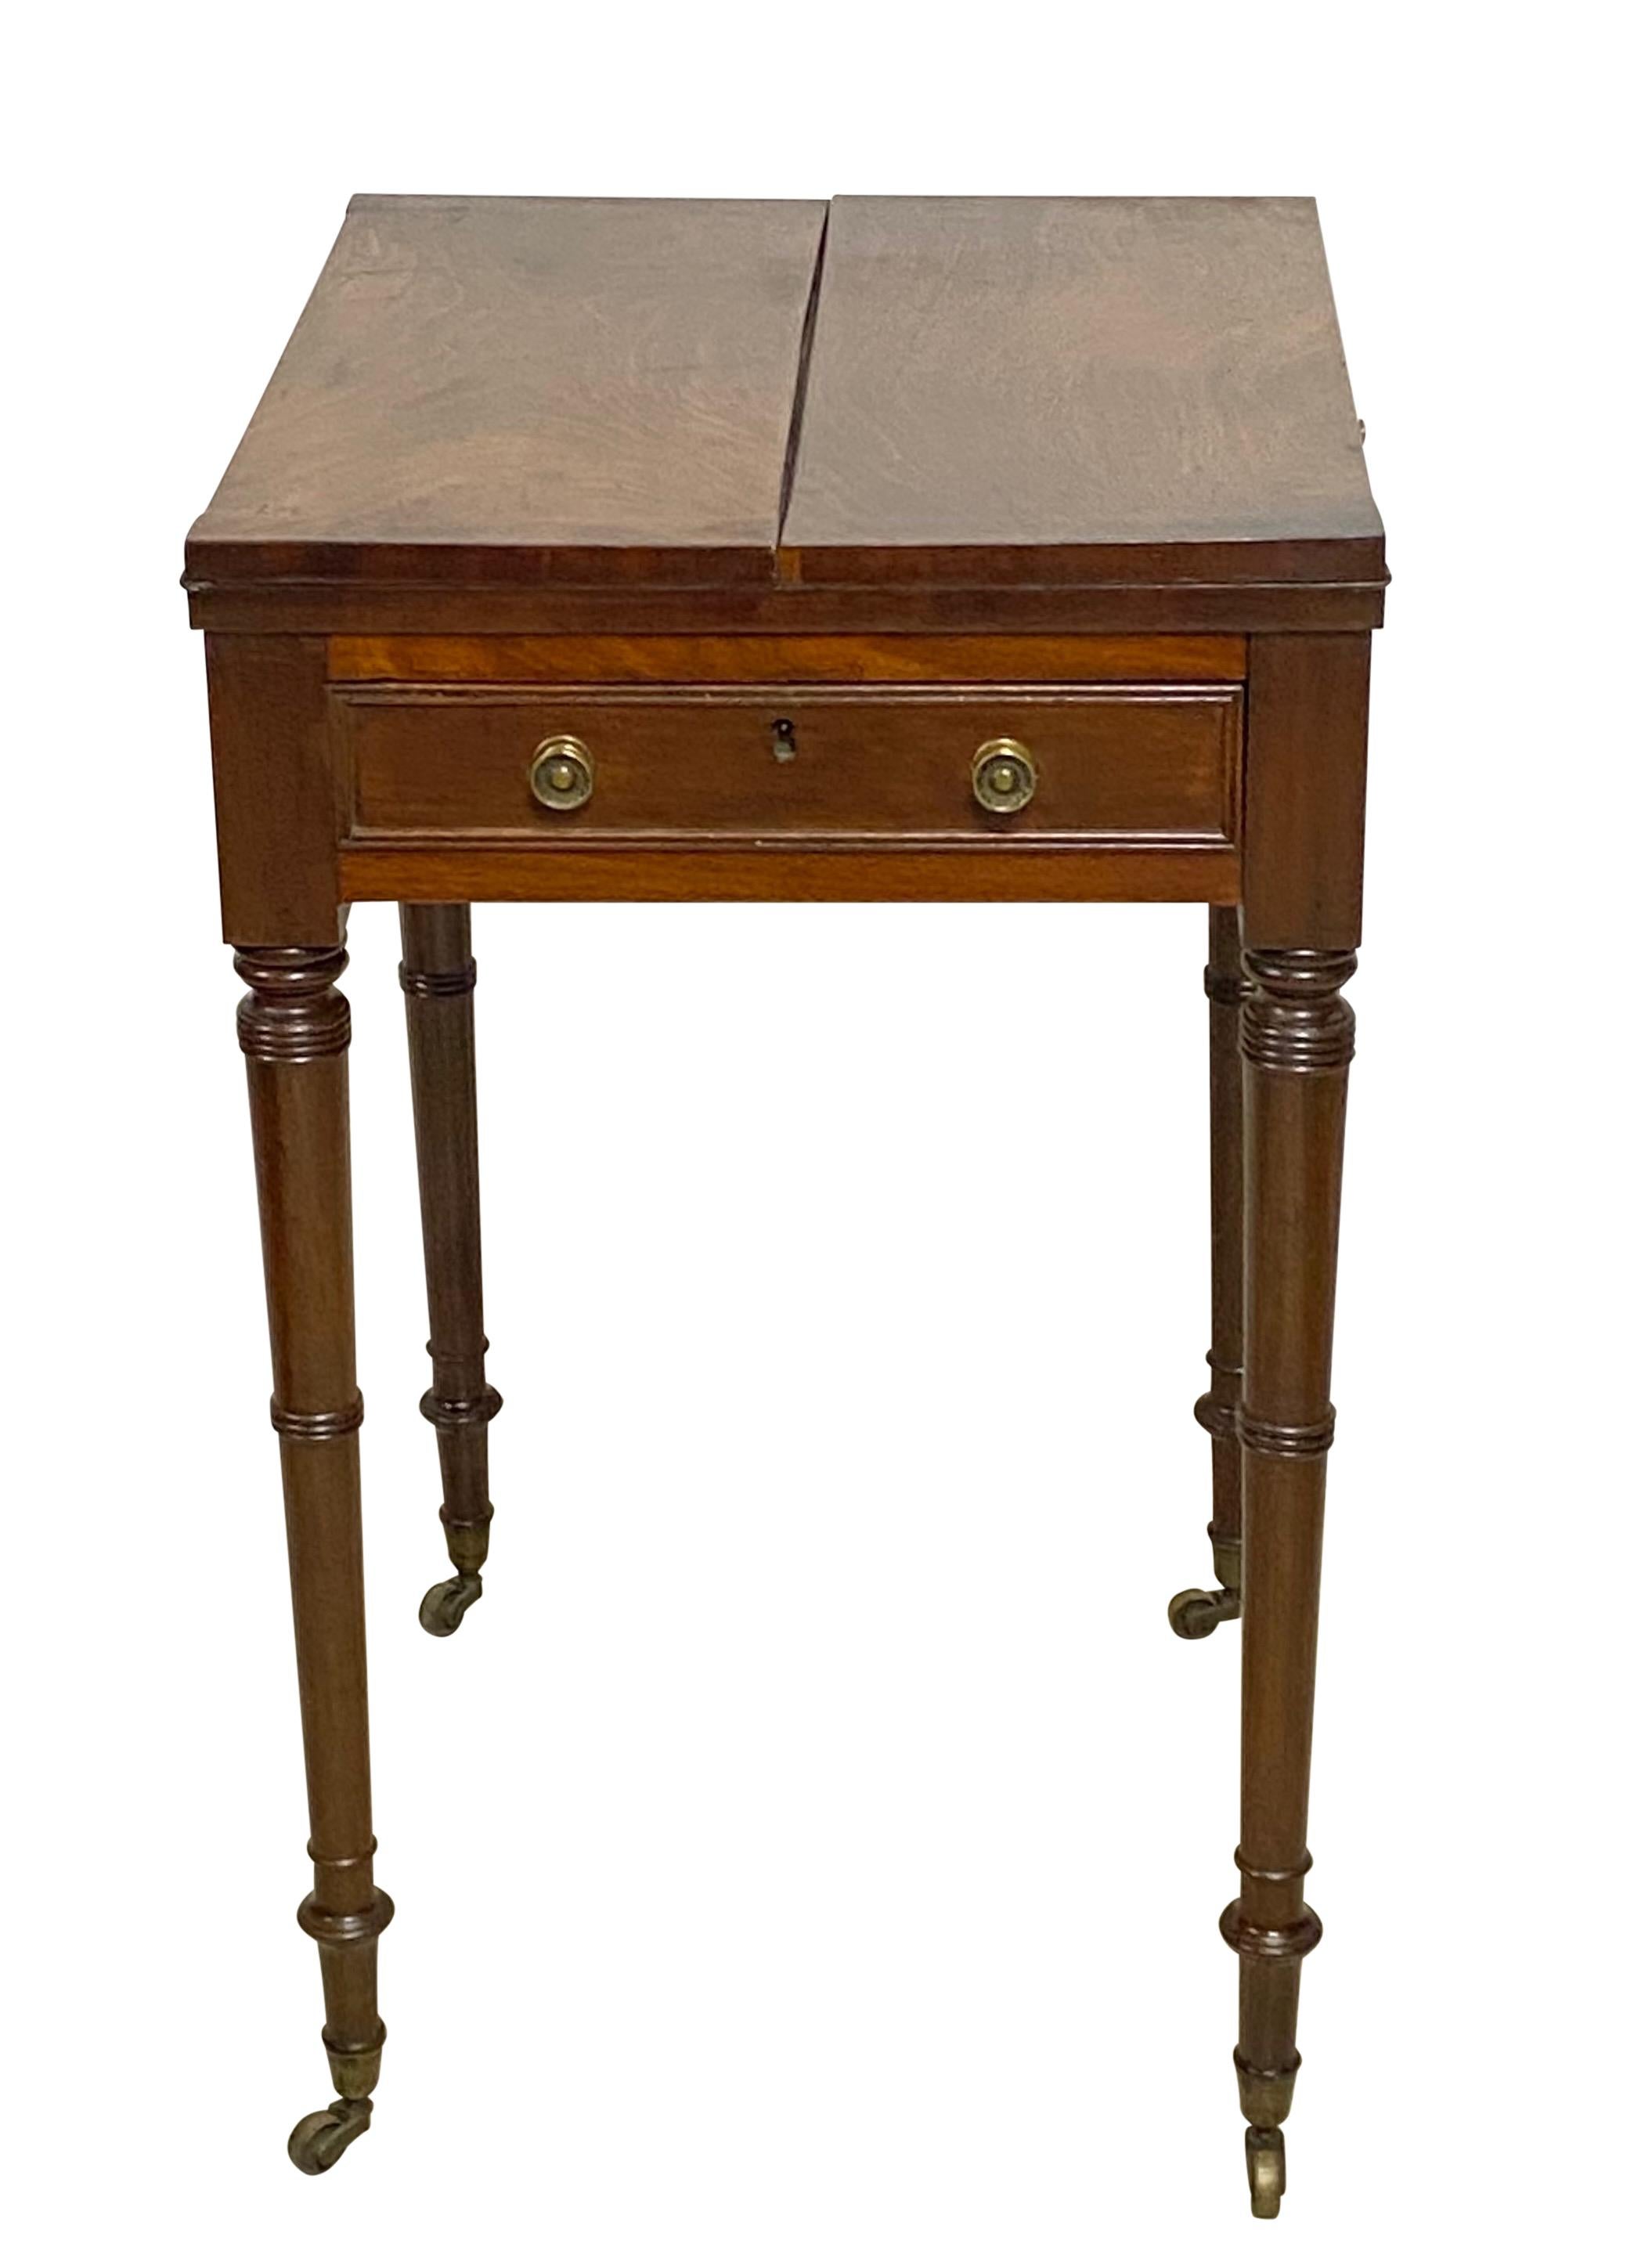 Regency Mahogany and Leather Side Table, English Early 19th Century For Sale 6